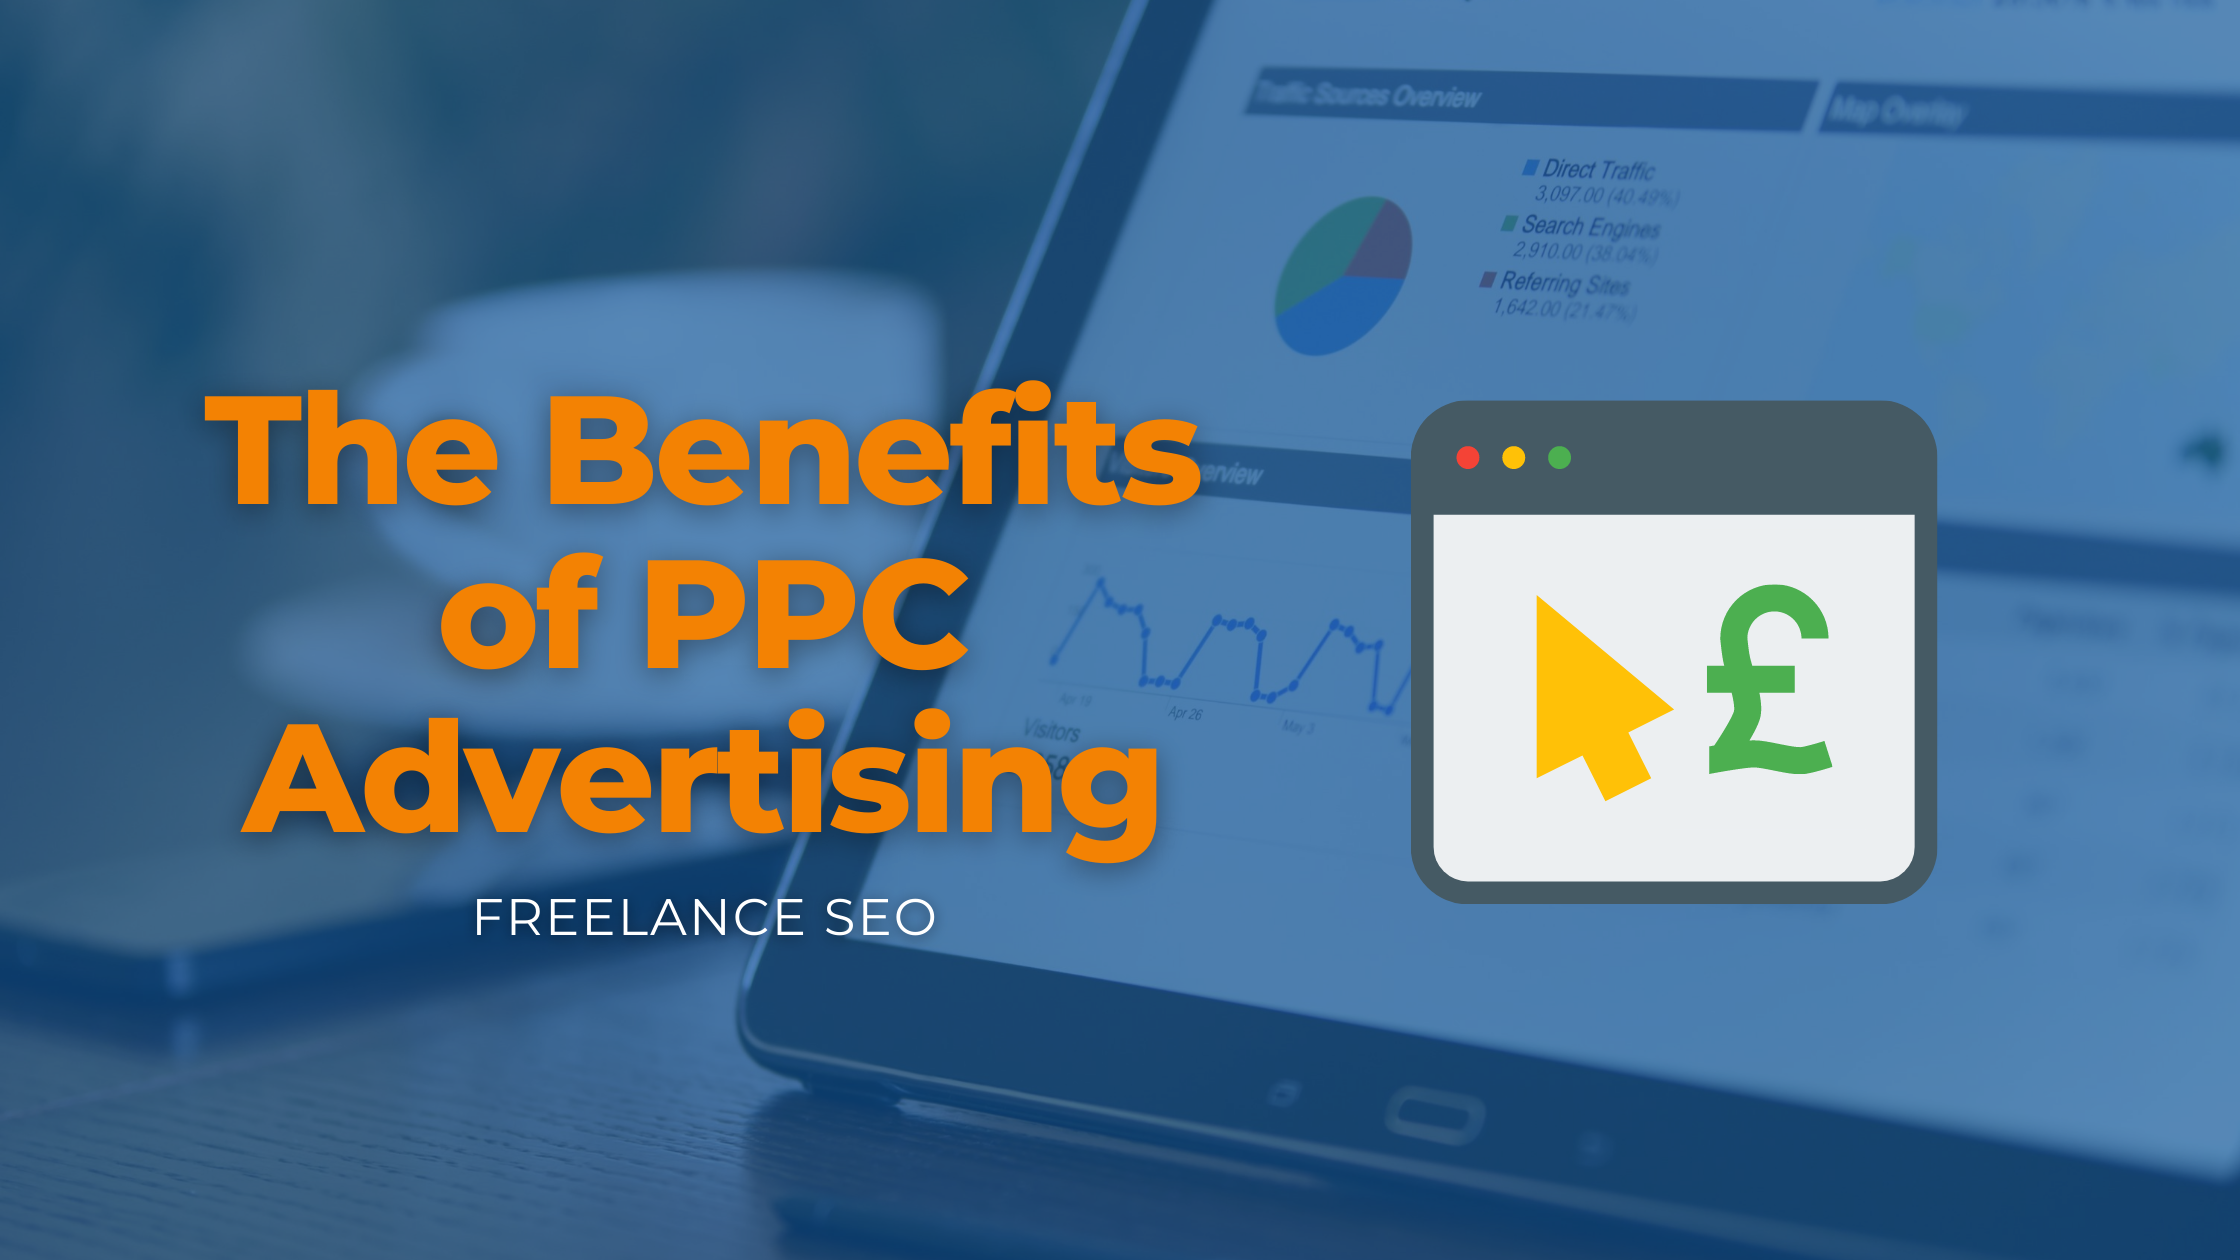 The benefits of PPC advertising